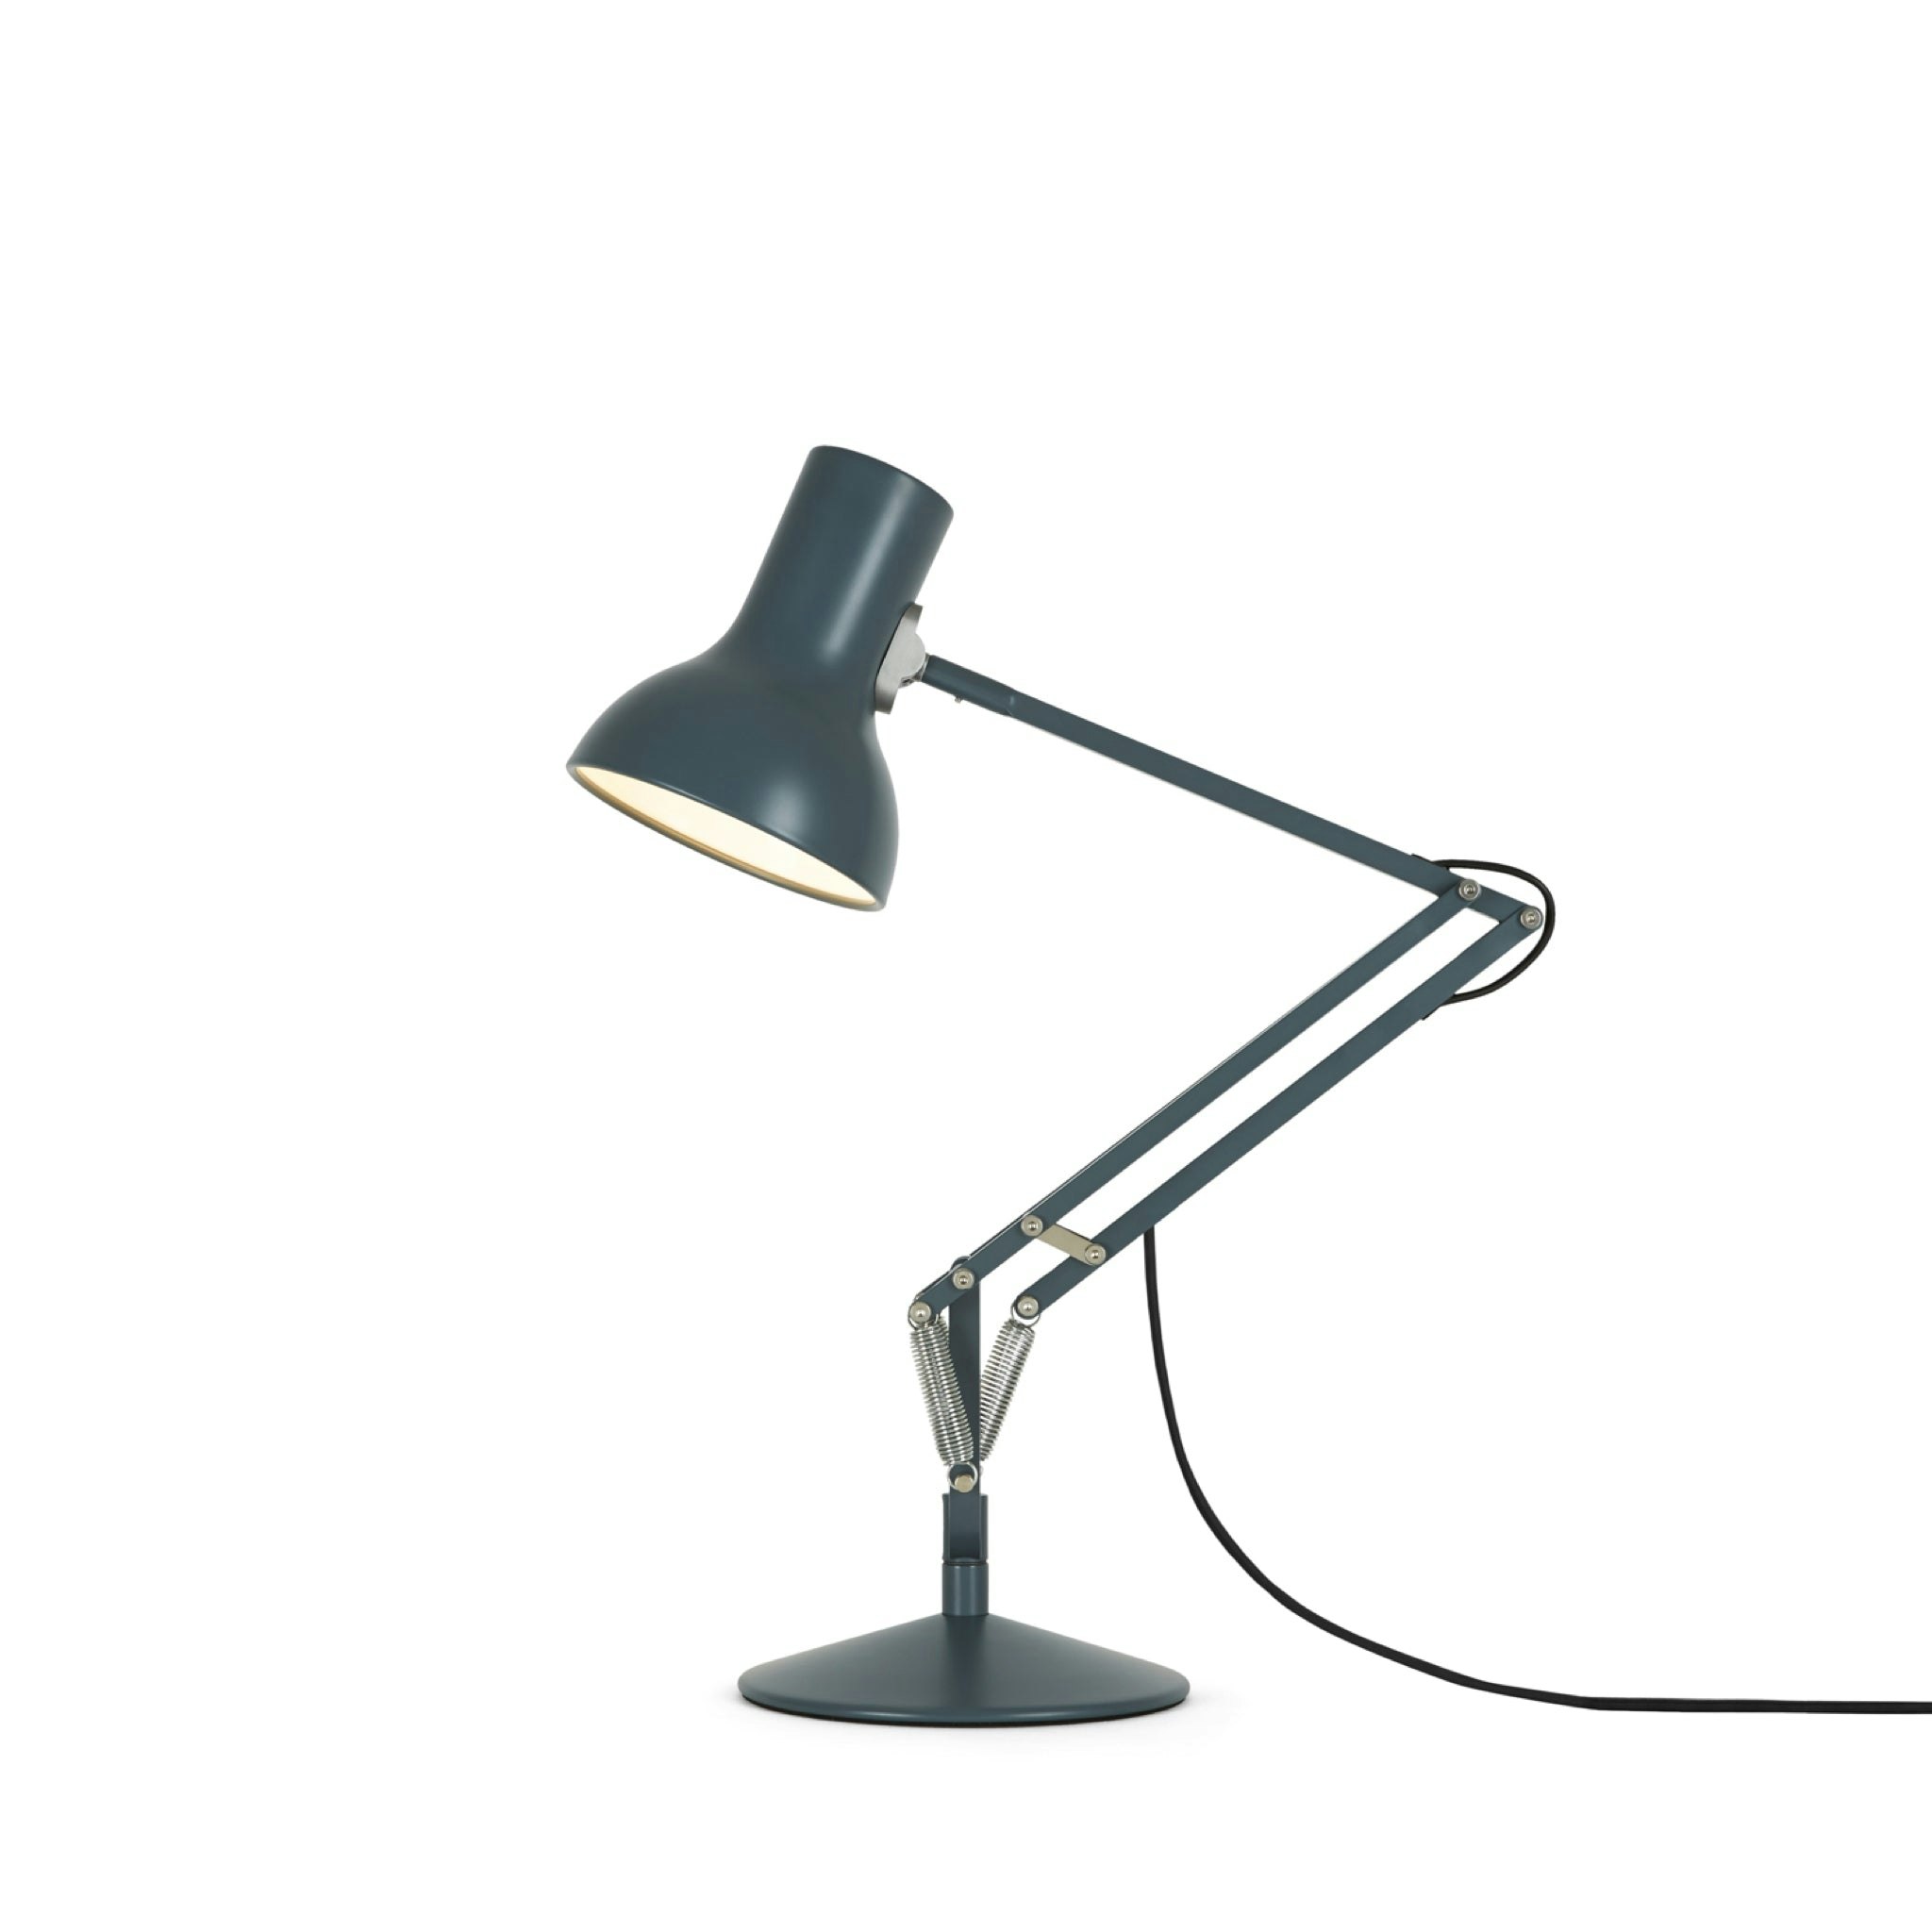 Type 75 Mini Desk Lamp with Push Switch by Anglepoise